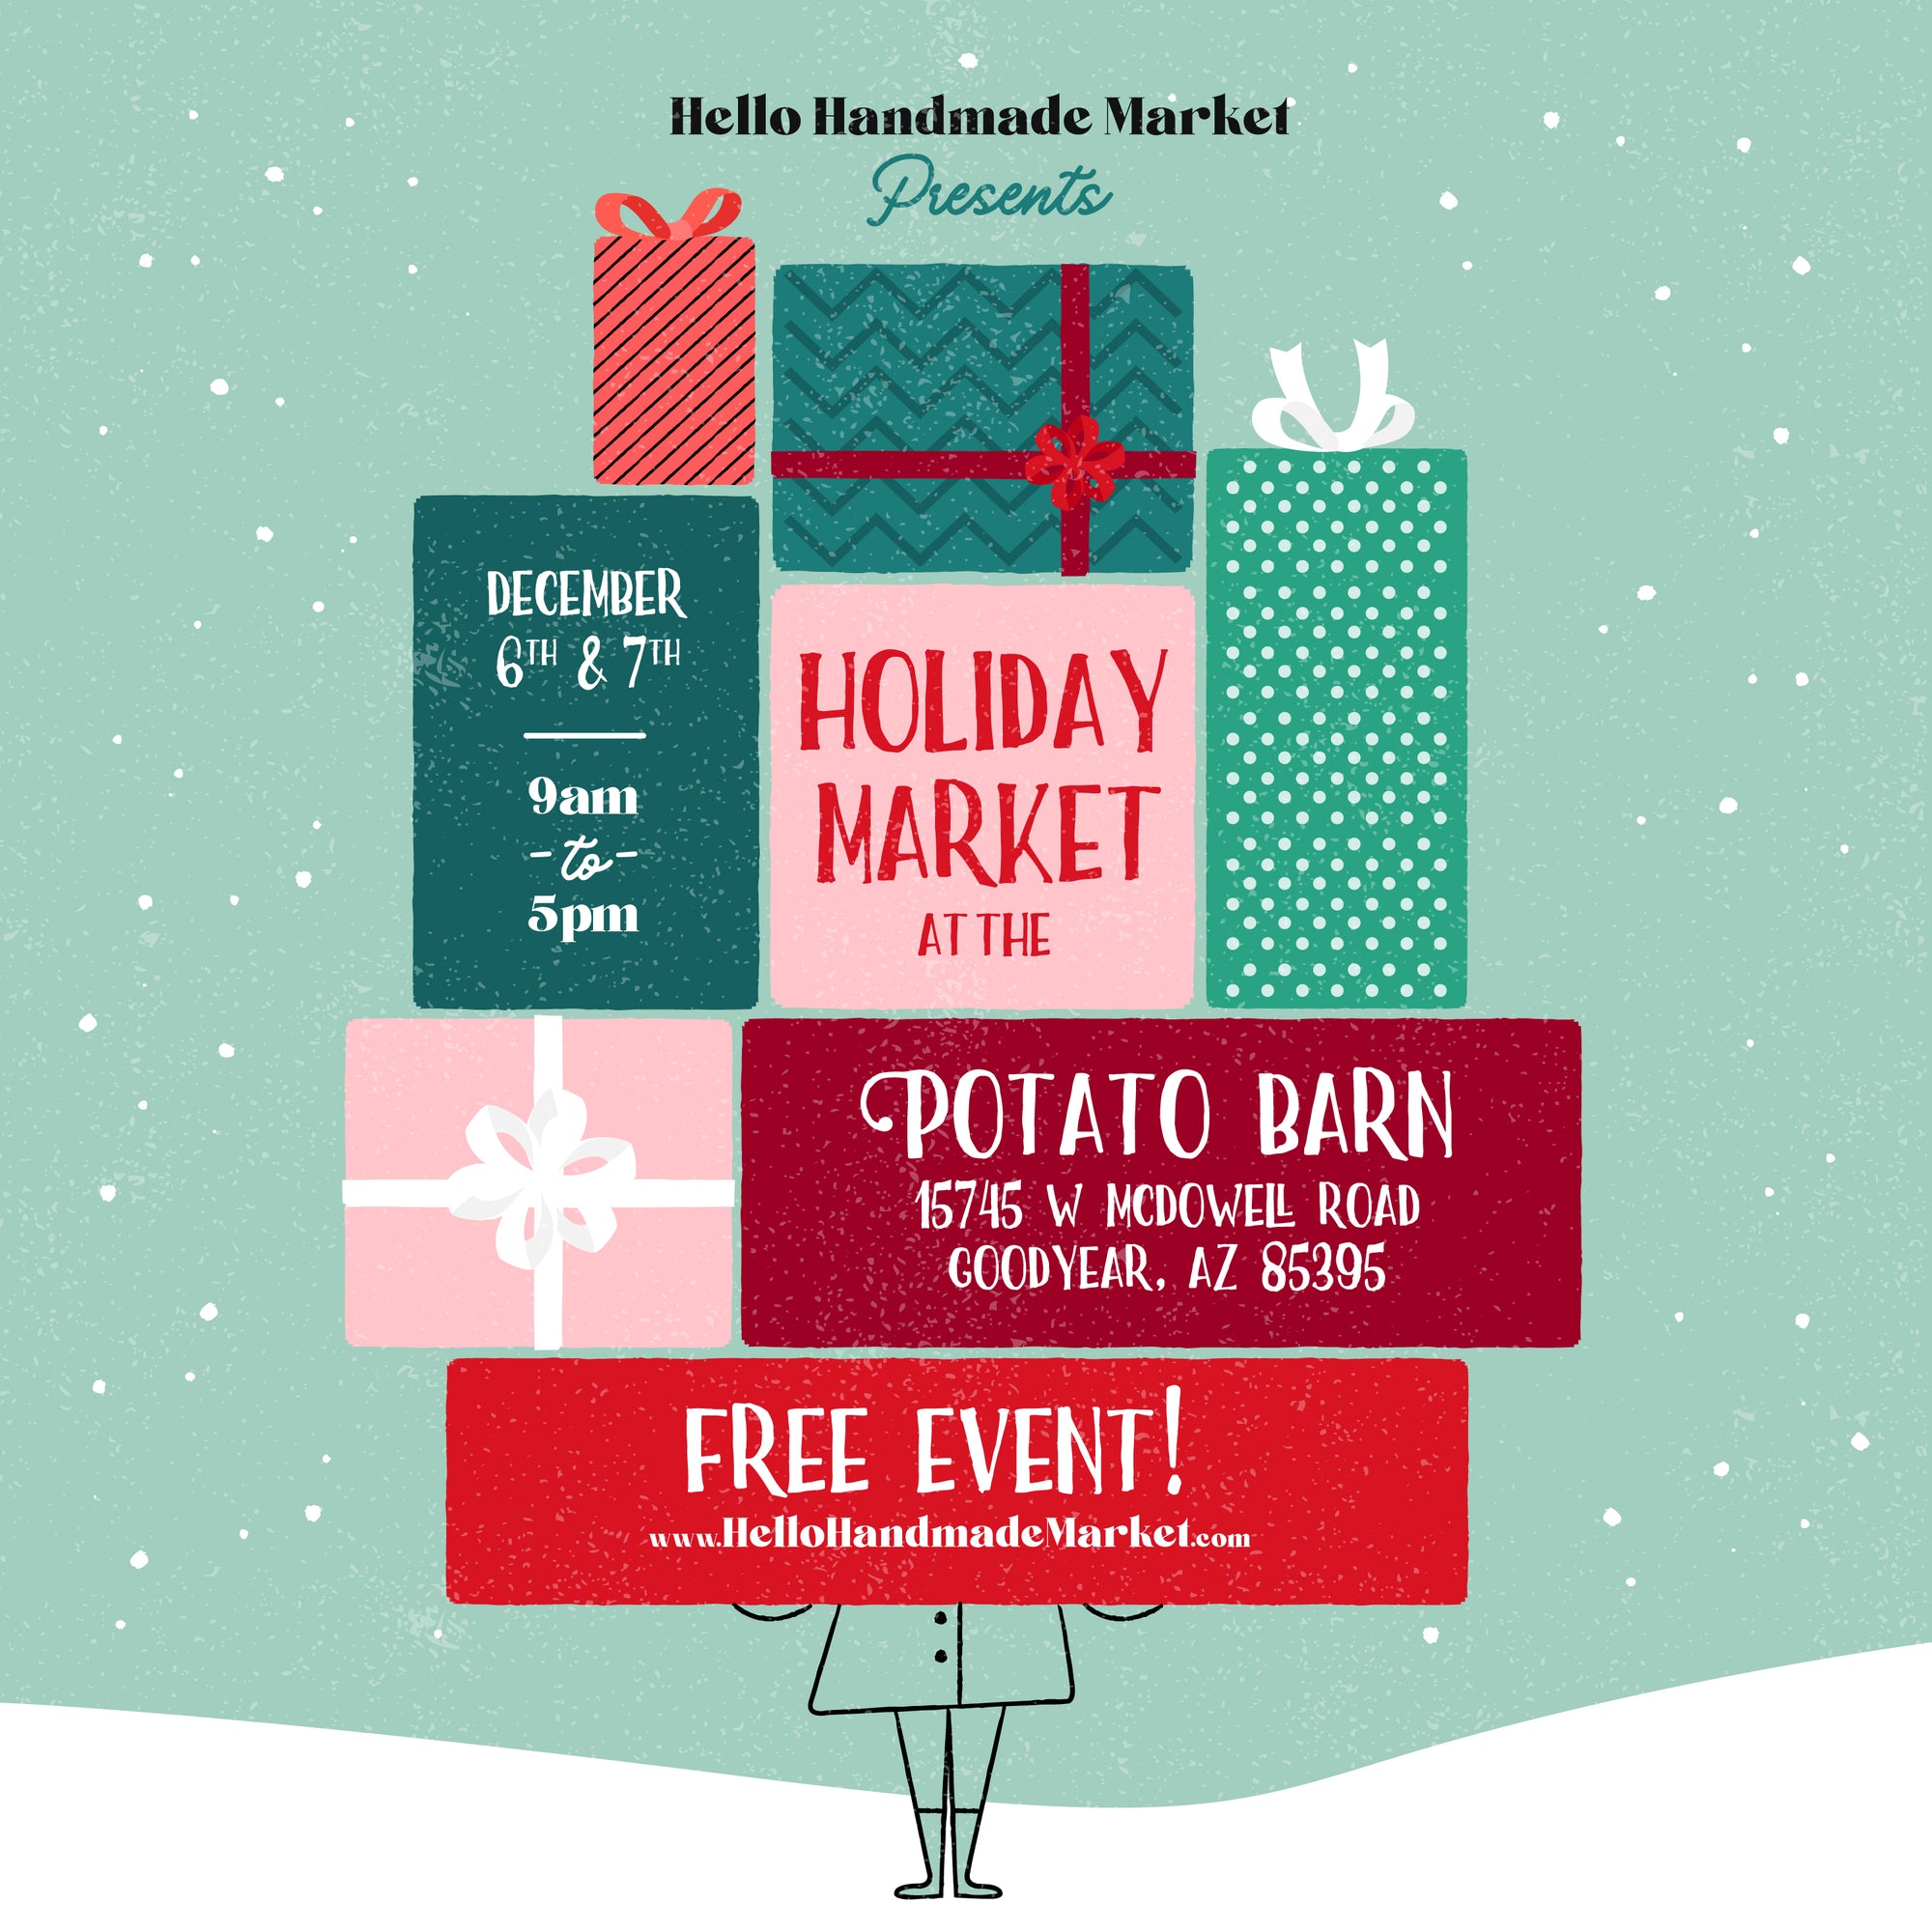 Be a Vendor at our Holiday Market at Potato Barn in Goodyear